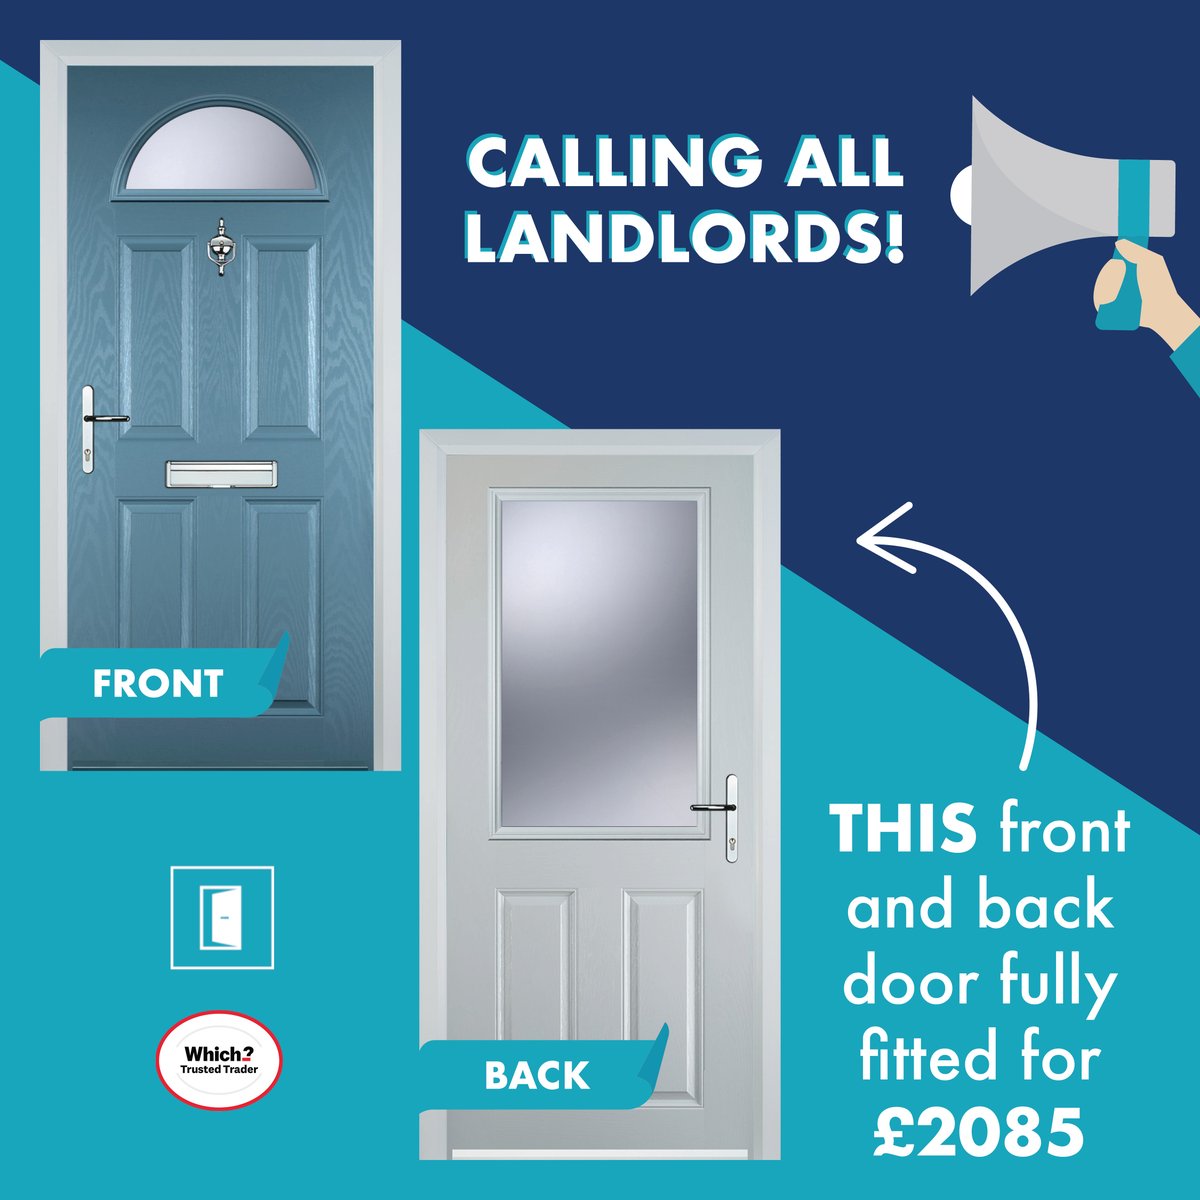 💼 Calling all landlords! Make your properties stand out in the rental market with our #bankholiday offer on this front and back door, fully fitted for just £2085

Durable, stylish, and tenant-approved!
loom.ly/oapNCWg

#BankHolidaySale #LimitedTimeOffer #RentalProperties